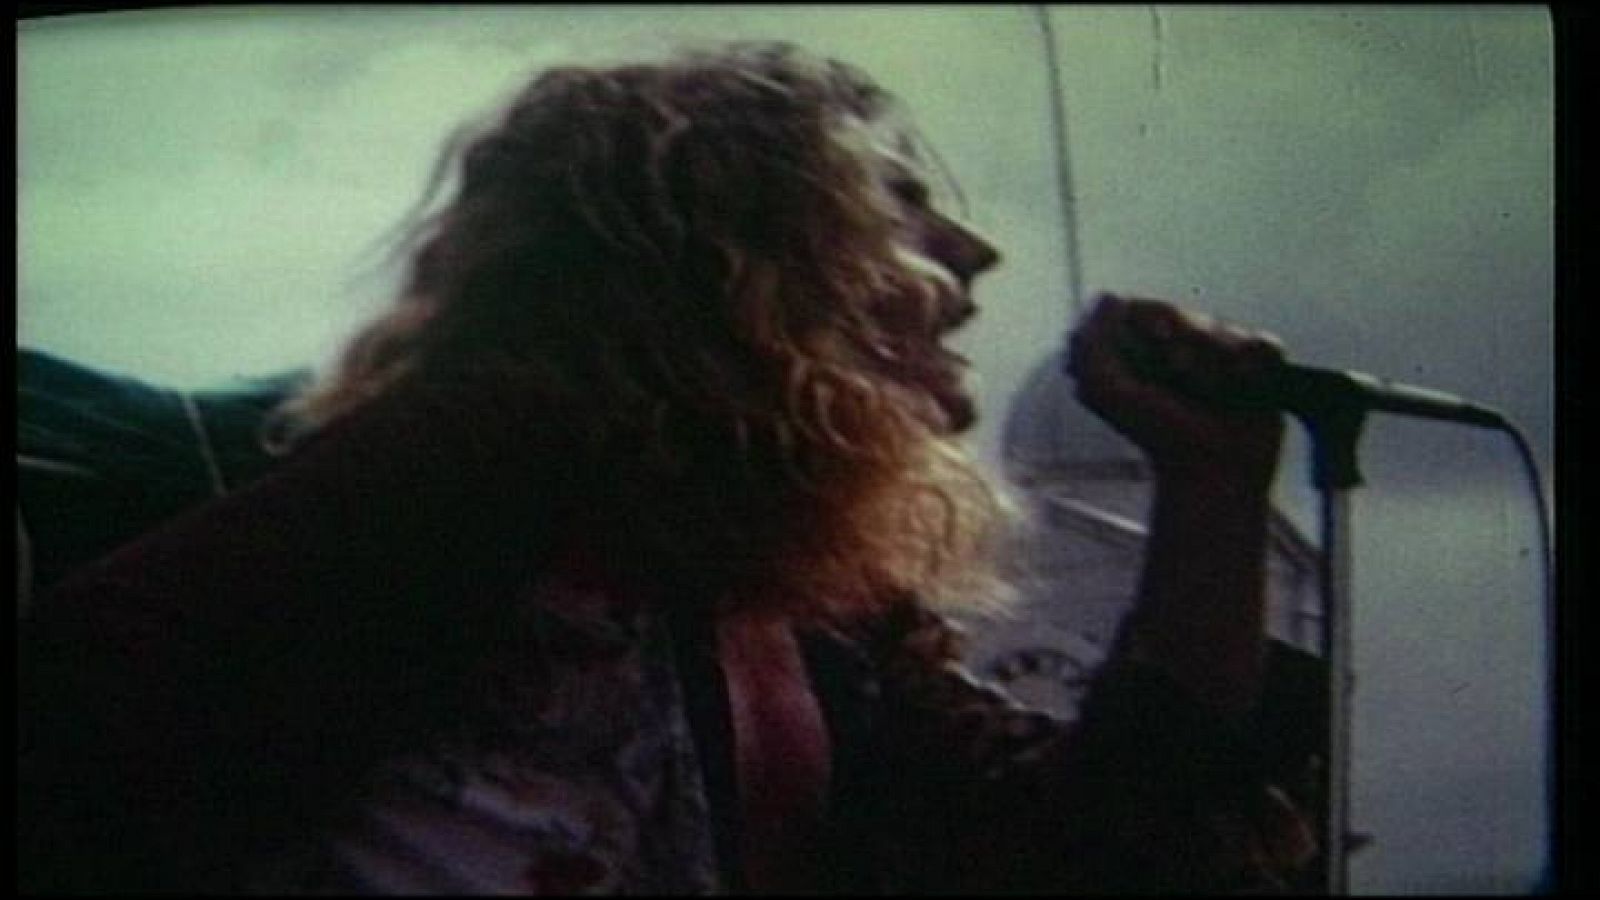 Led Zeppelin, "Inmigrant Song"